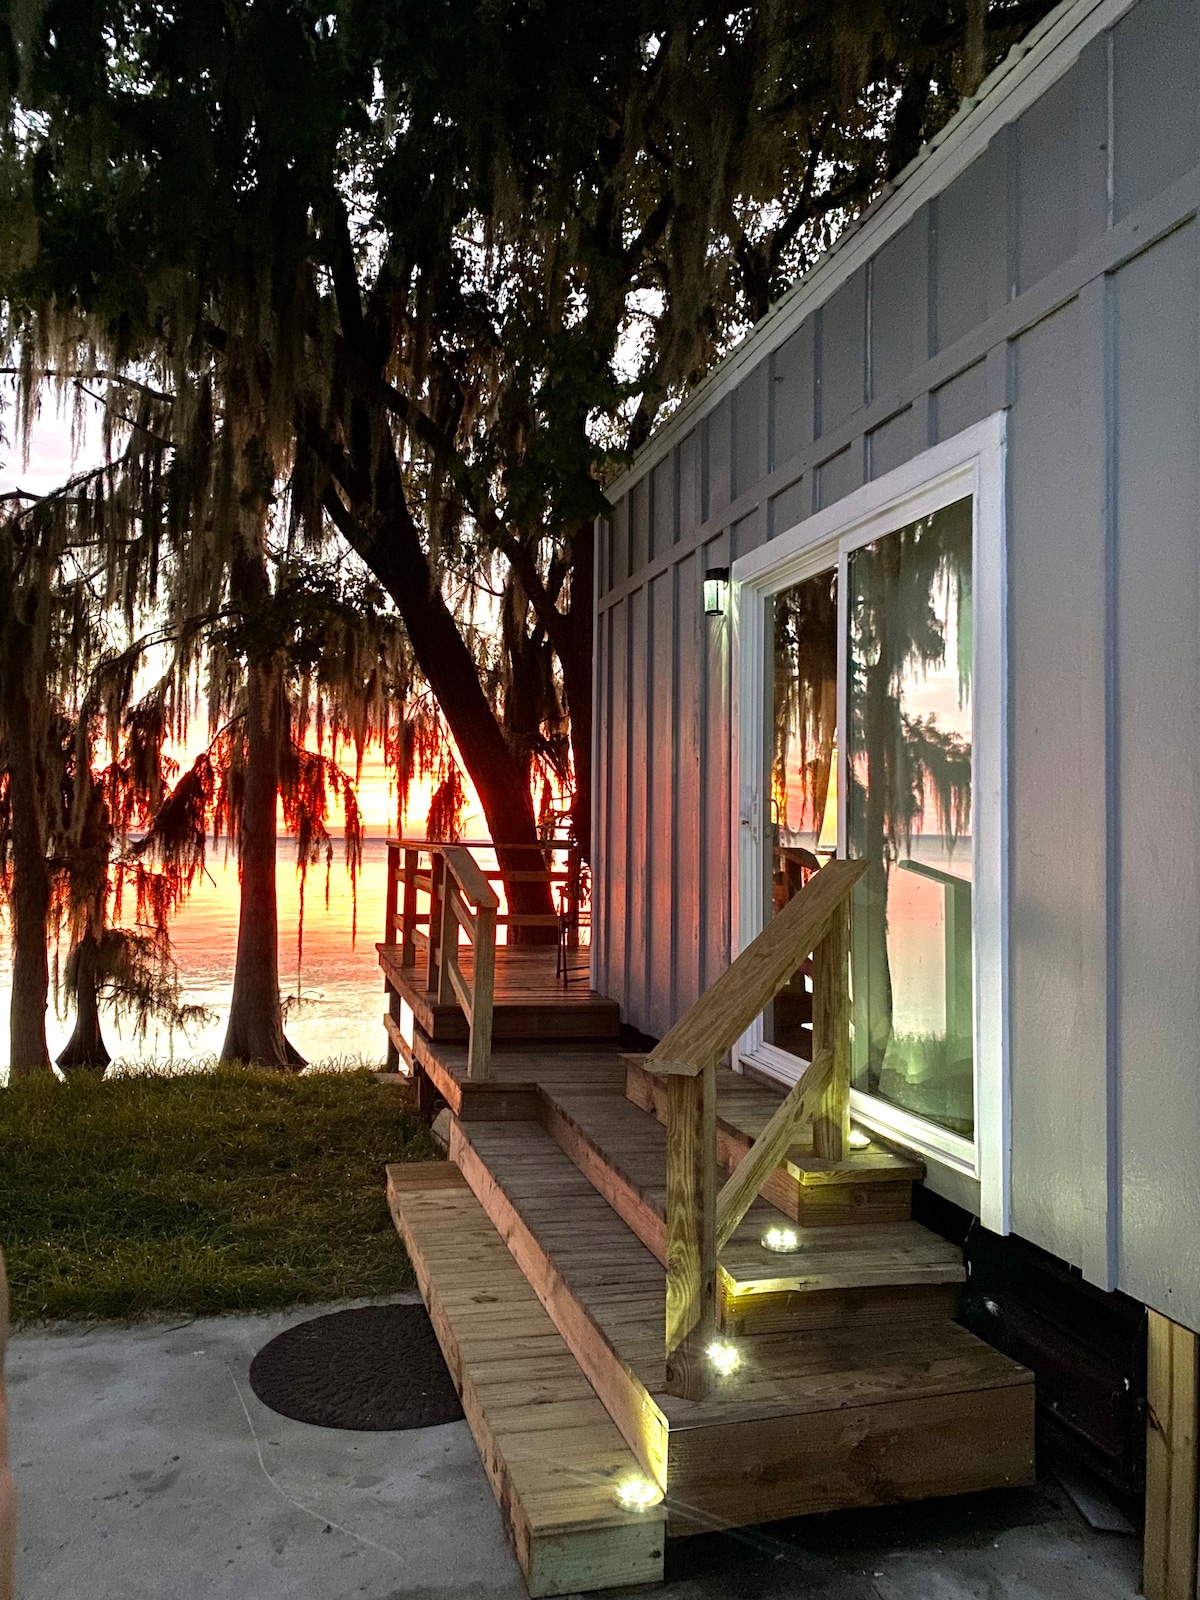 Waterfront Tinyhouse + Marina, Sunsets + Springs!